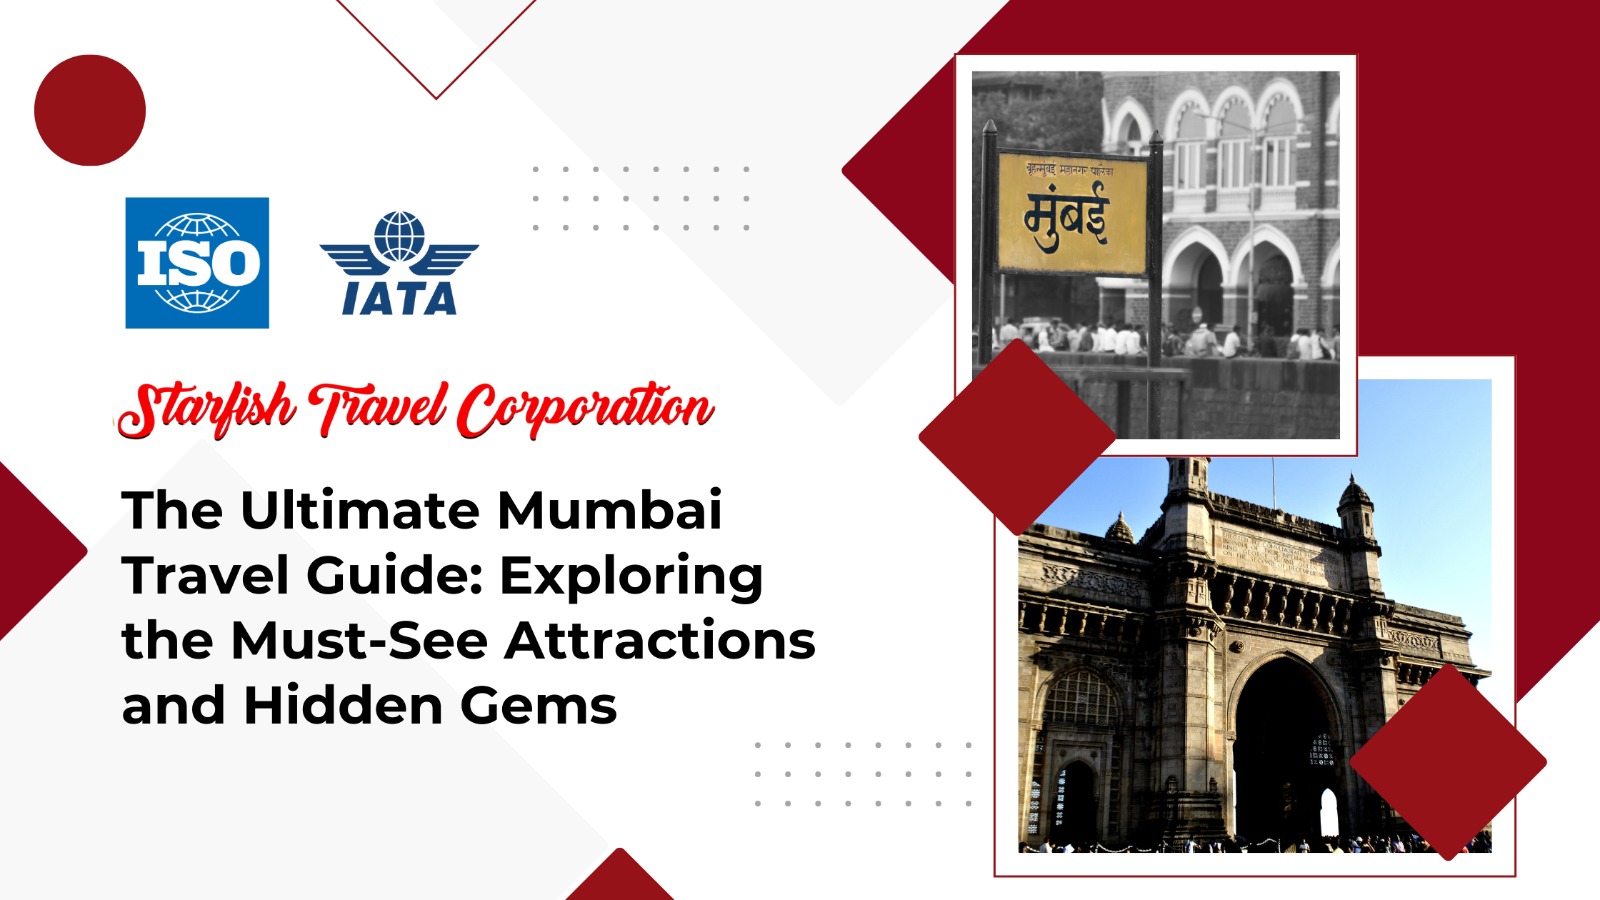 The Ultimate Mumbai Travel Guide: Exploring the Must-See Attractions and Hidden Gems